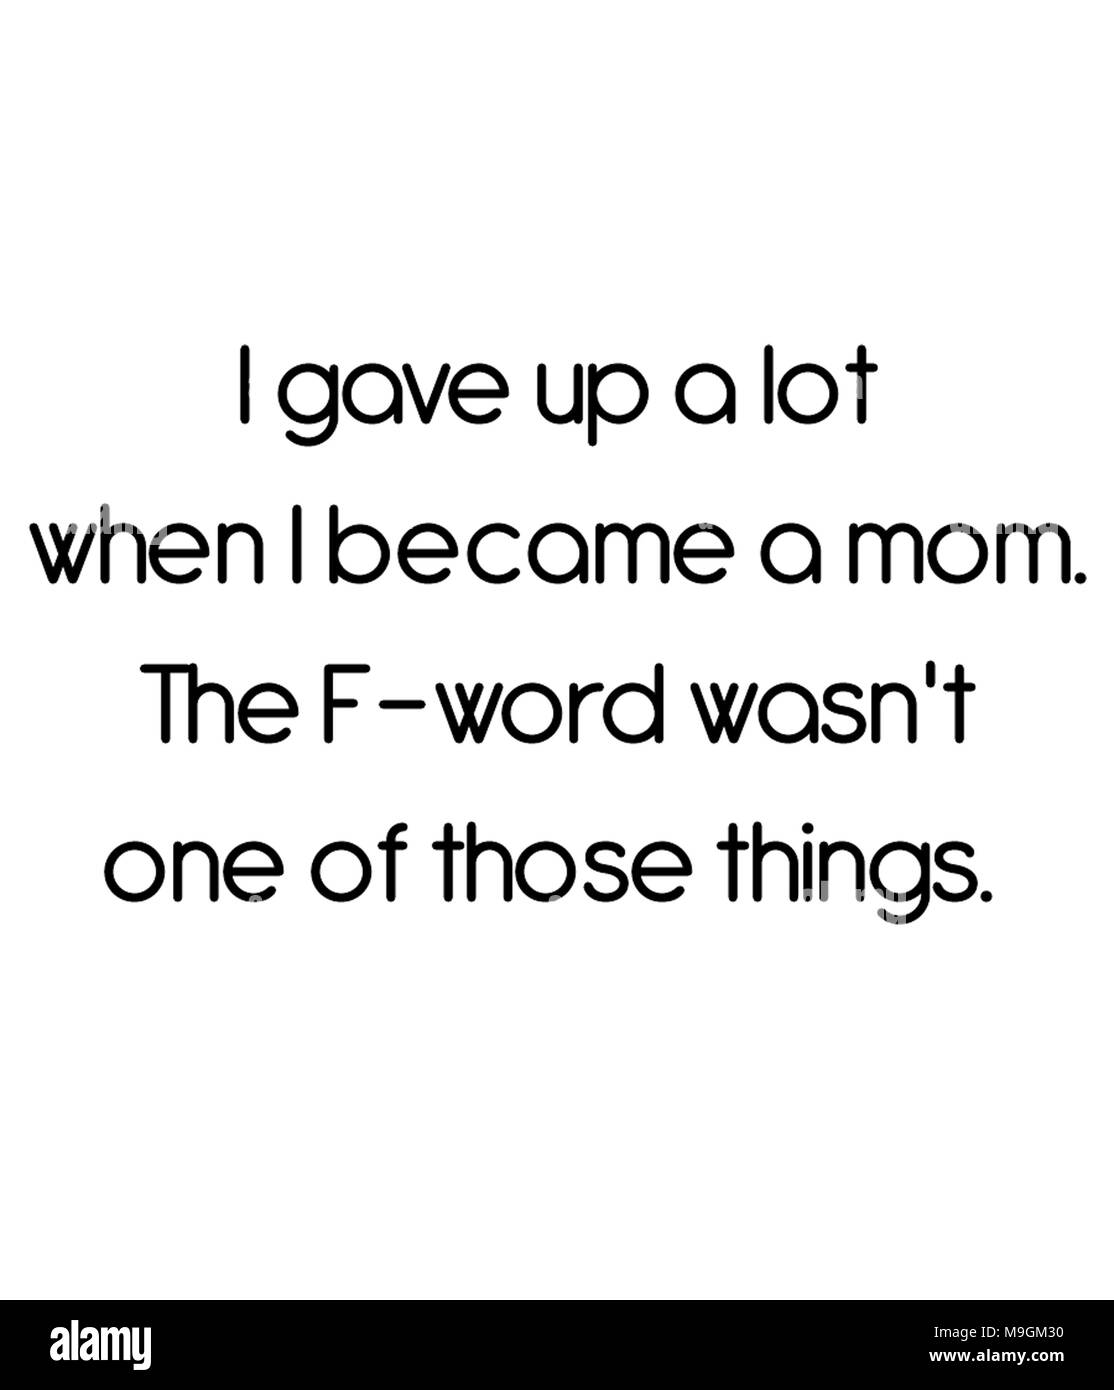 I gave up a lot when I became a mom. The F-word wasn't one of those things. Stock Photo